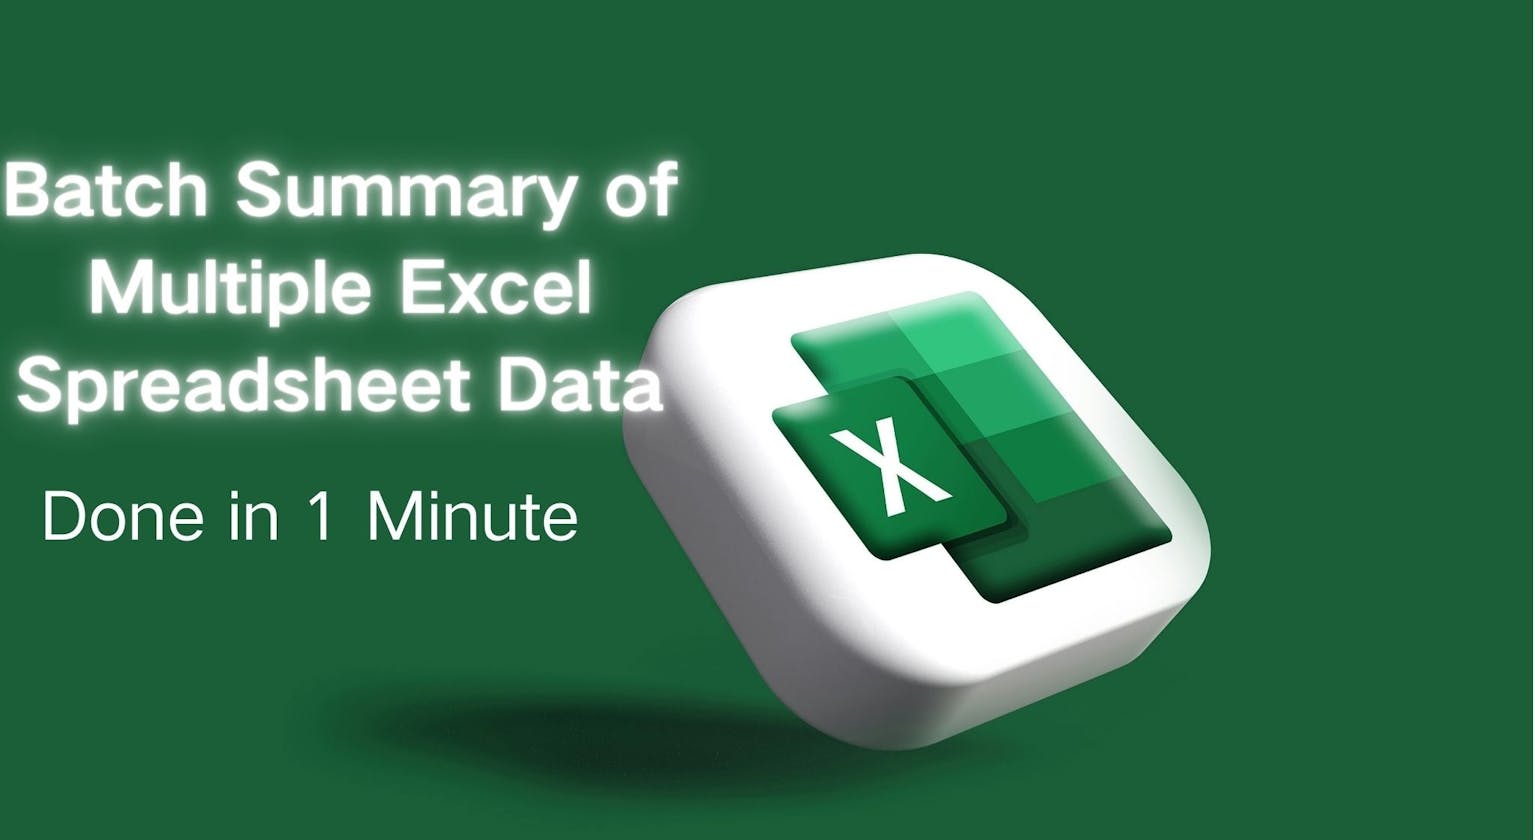 Batch Summary of Multiple Excel Spreadsheet Data – Done in 1 Minute